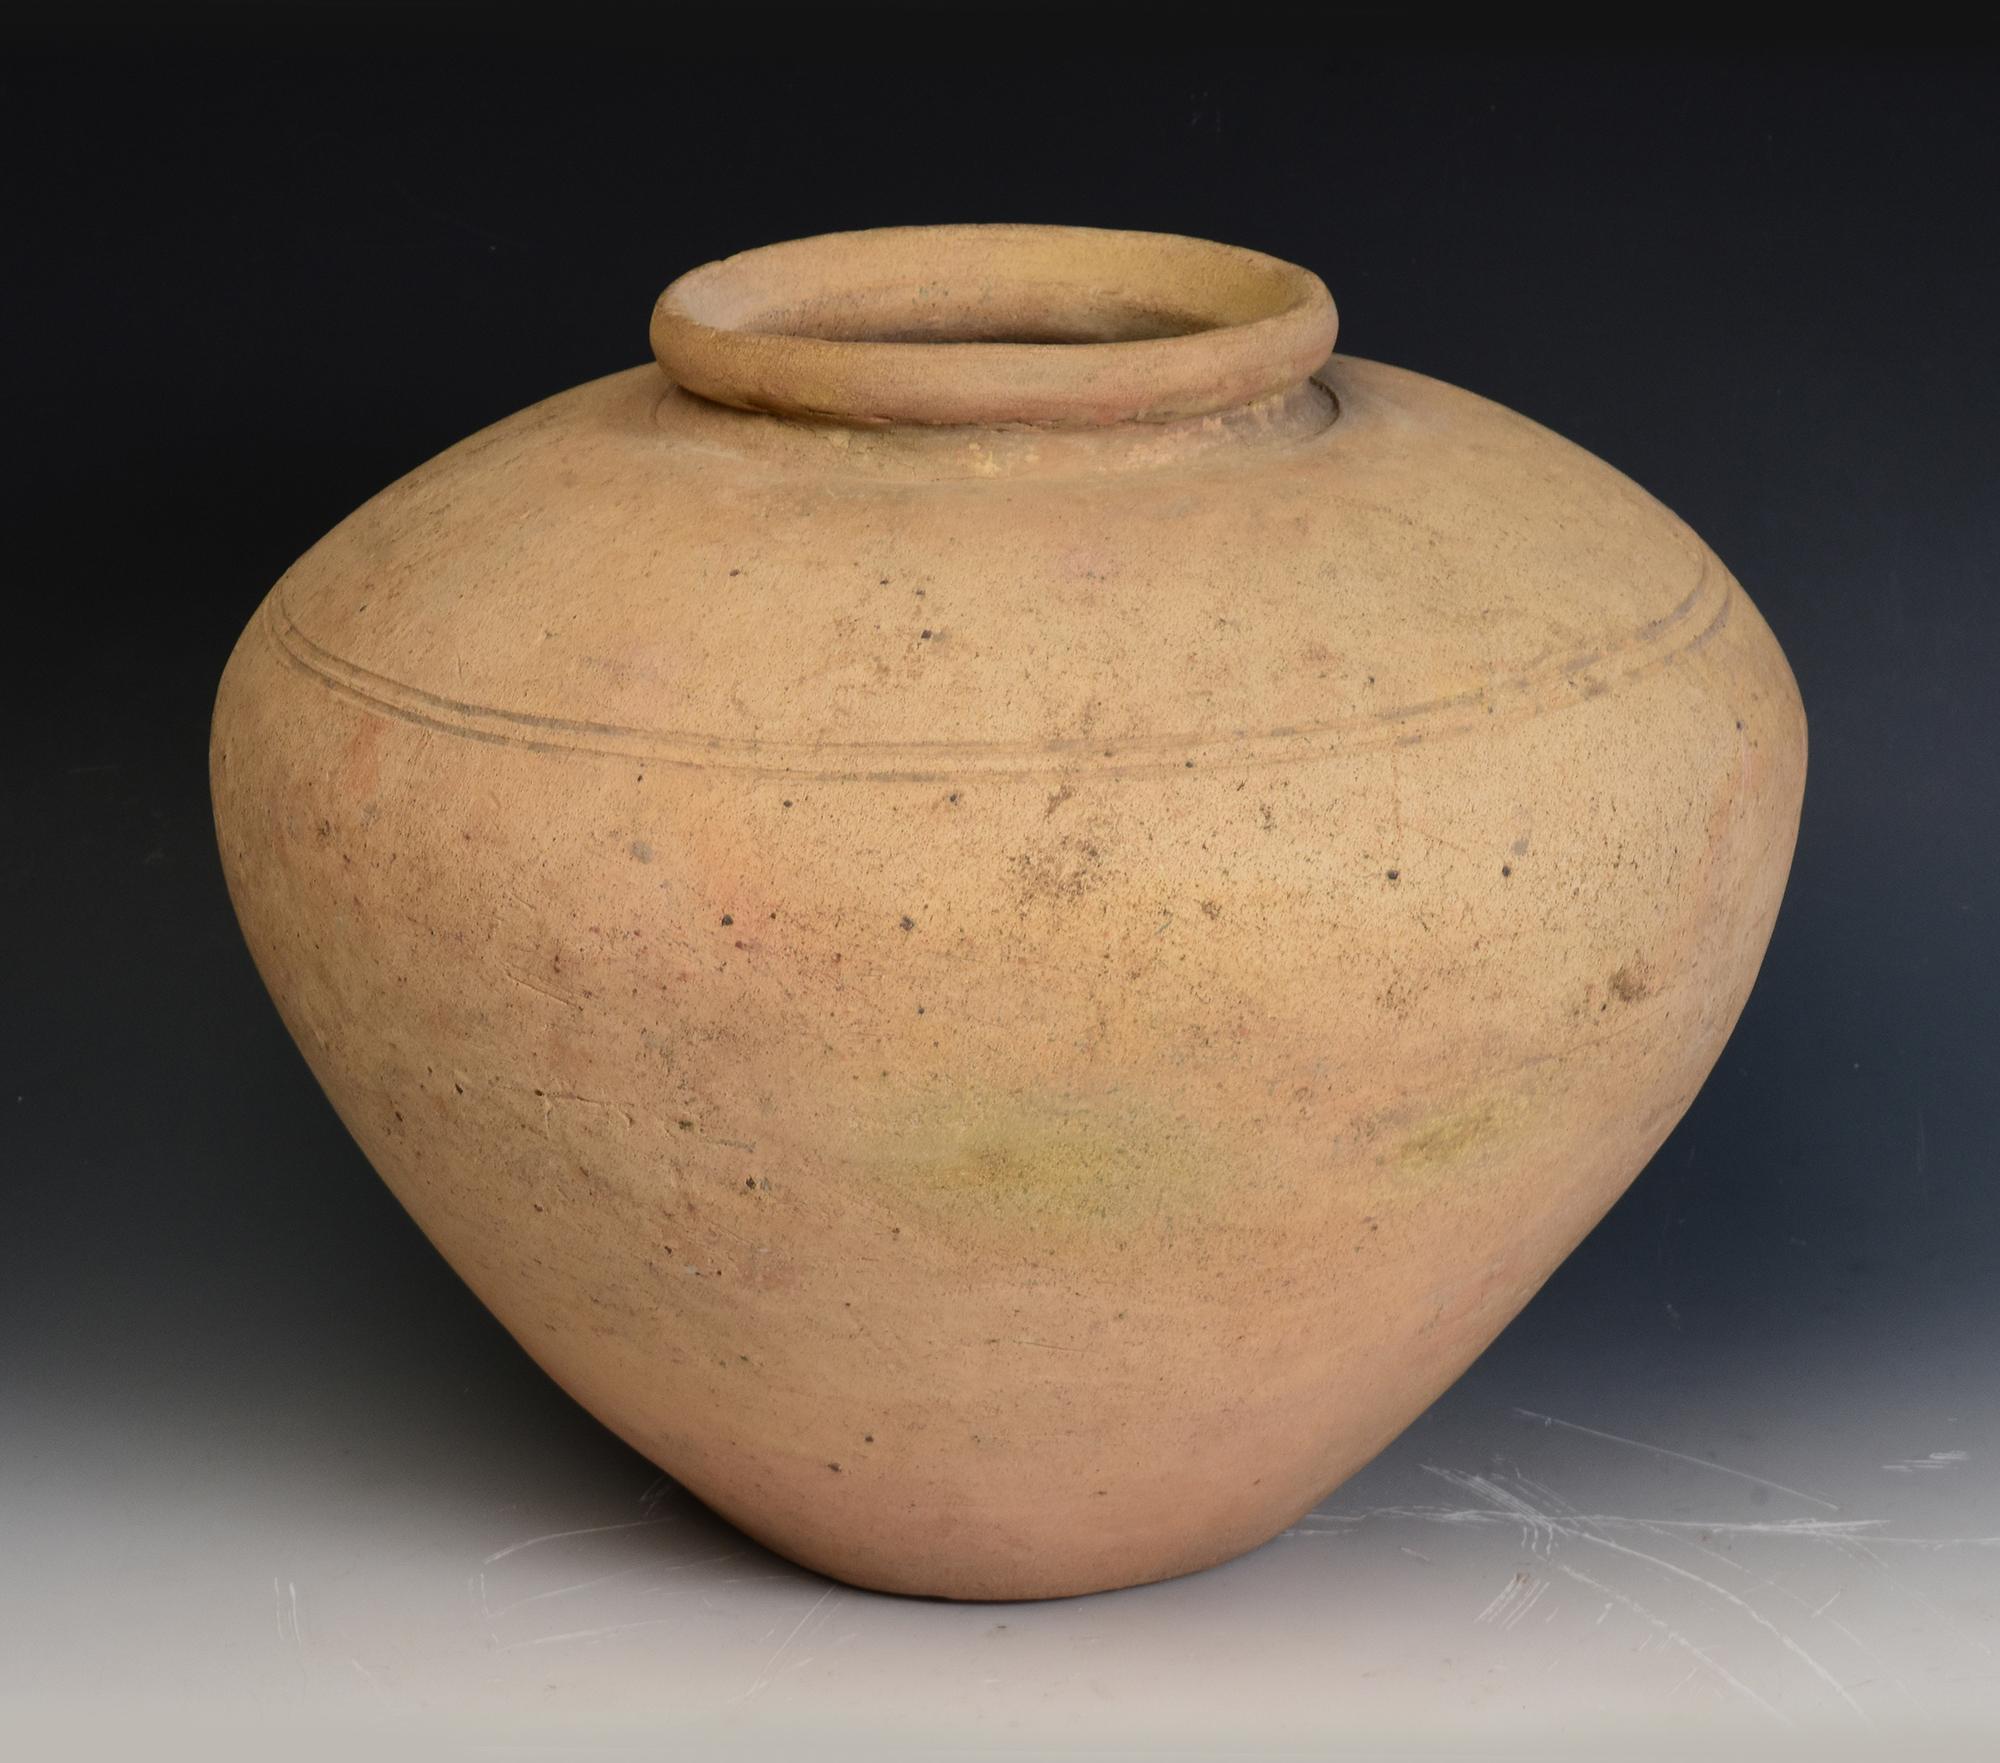 Antique Khmer pottery jar.

Age: Cambodia, Pre-Angkor Period, 6th - 7th Century
Size: Height 28.4 C.M. / Width 35 C.M.
Condition: Nice and condition overall (some expected degradation due to its age).

100% satisfaction and authenticity guaranteed